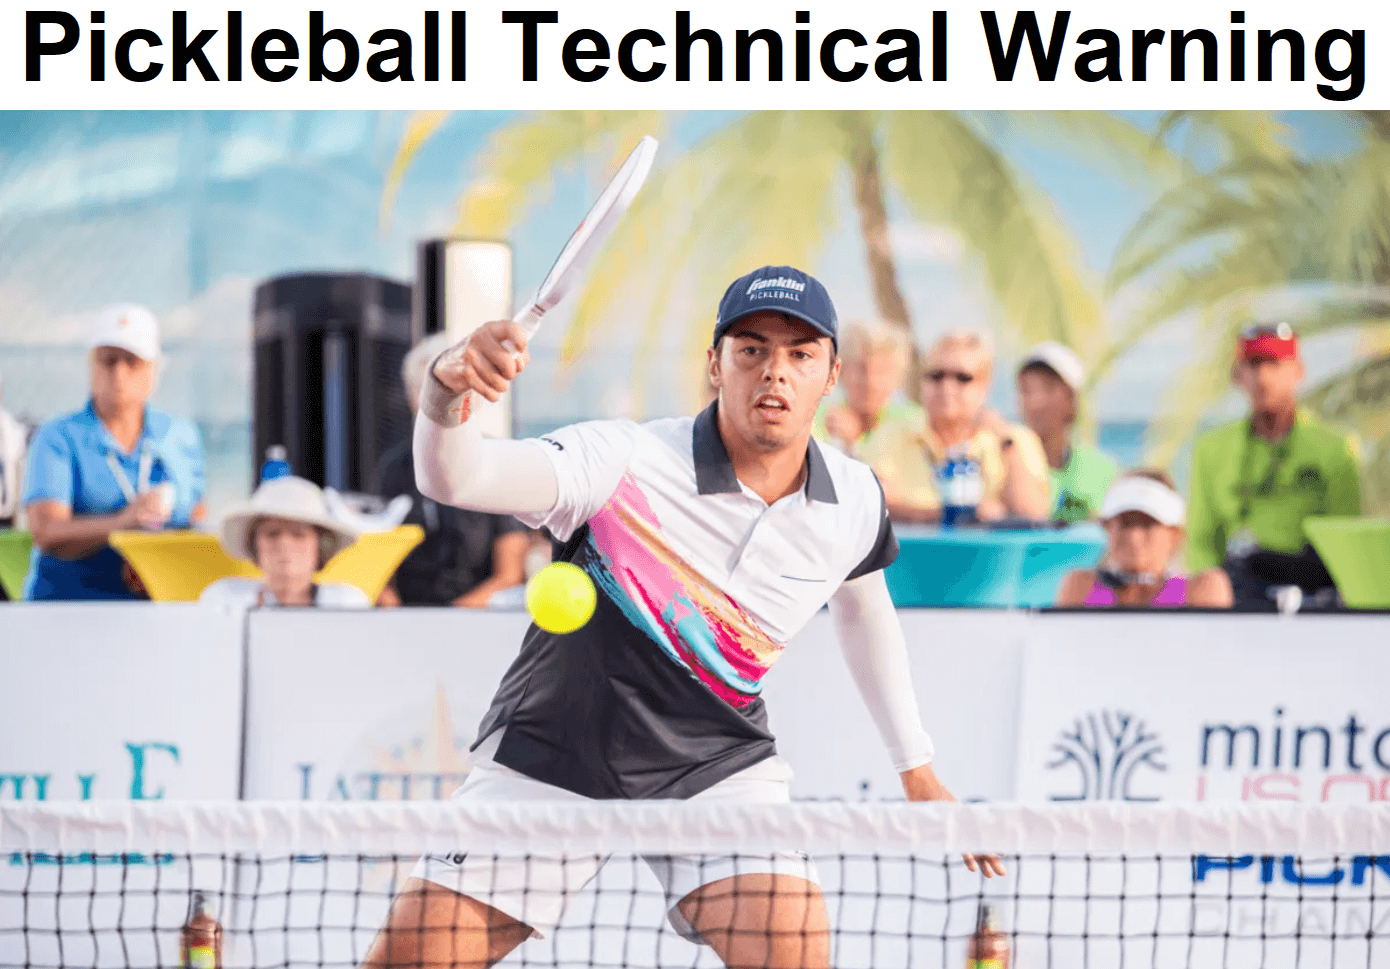 What is a technical warning in pickleball?